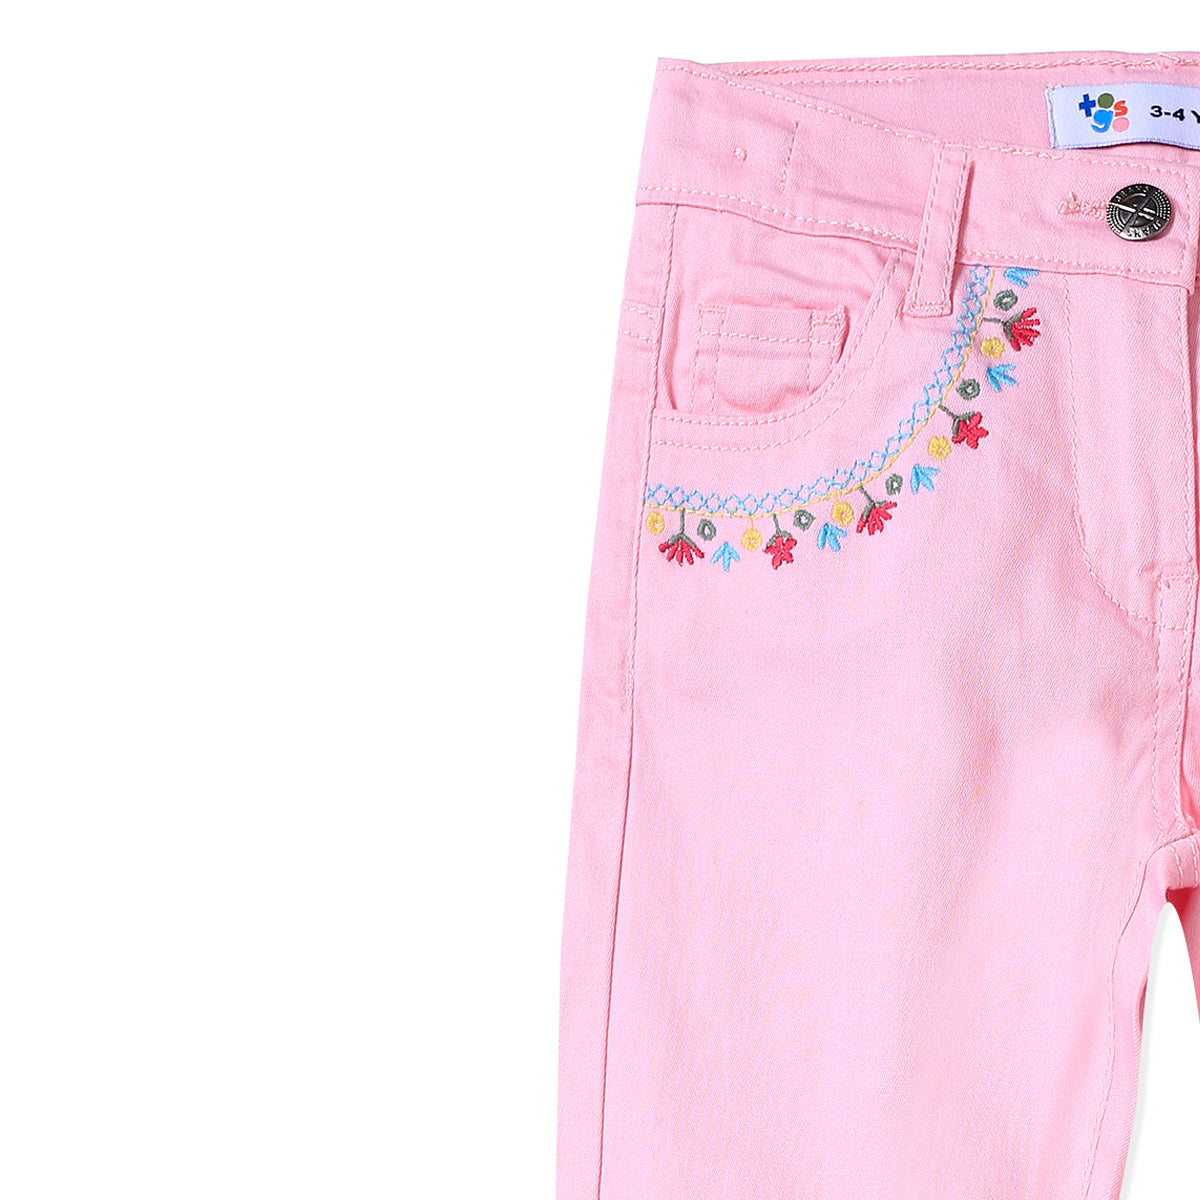 Pink Embriodered Cotton Pants